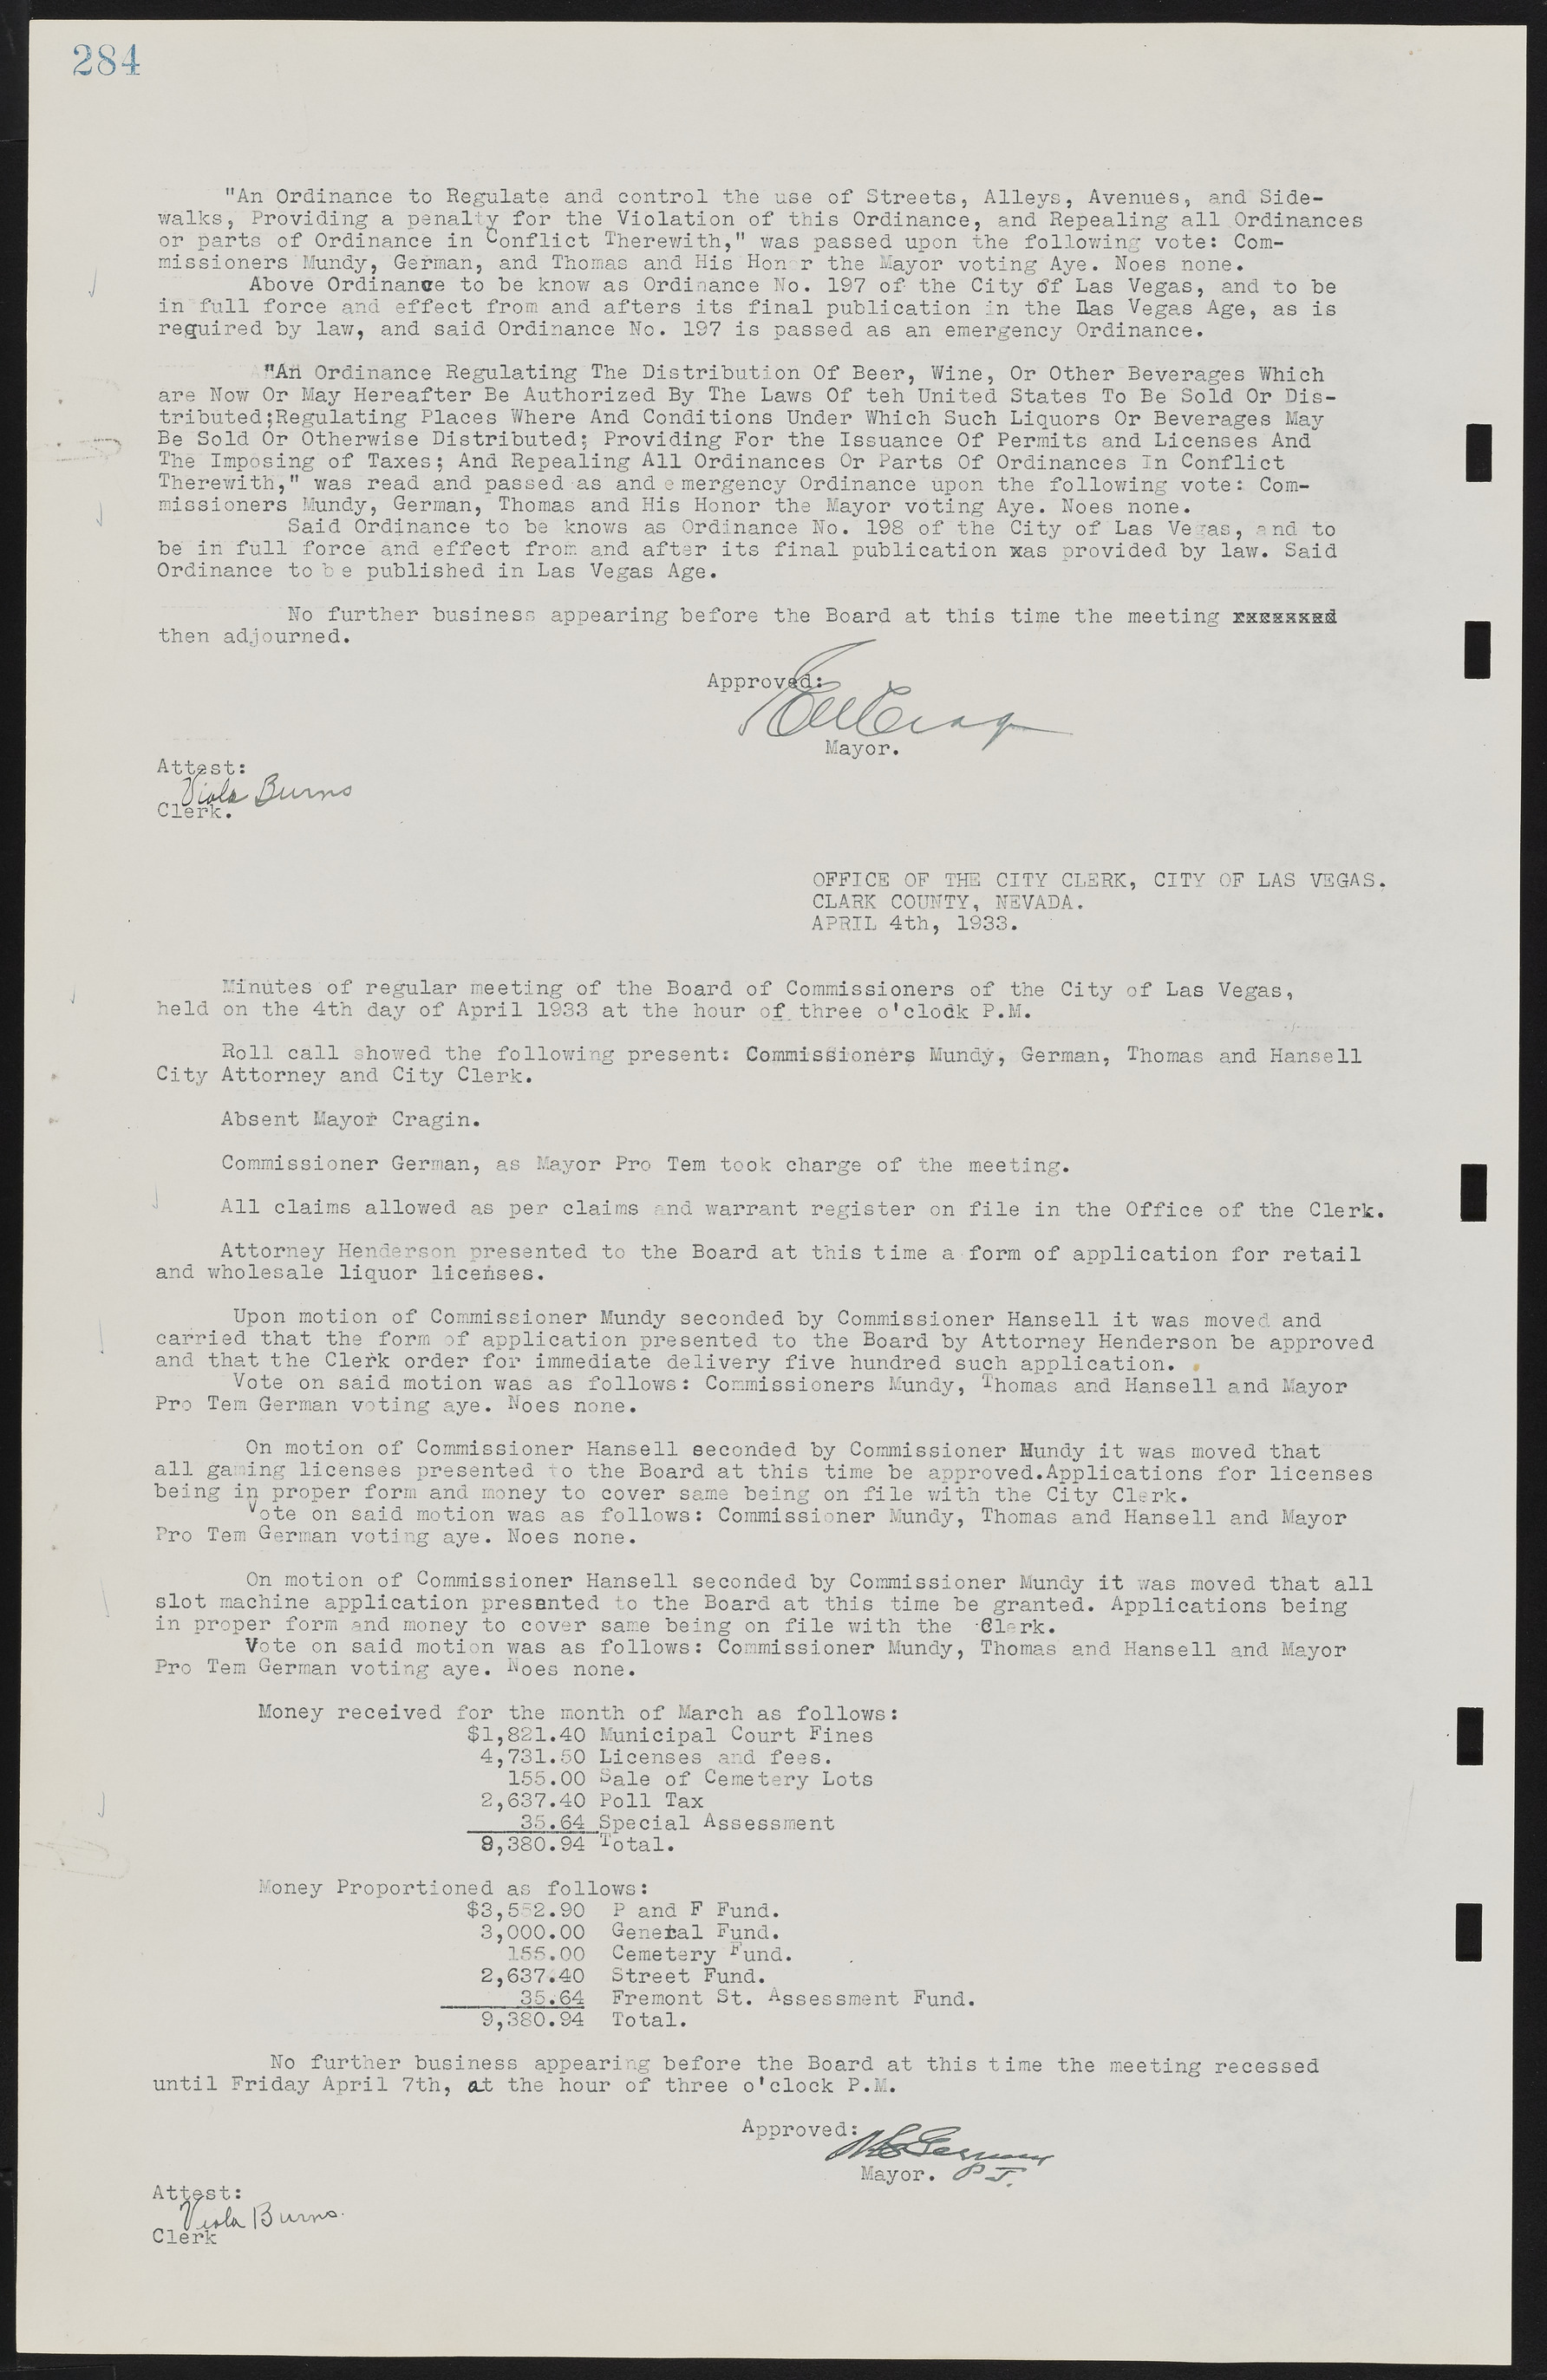 Las Vegas City Commission Minutes, May 14, 1929 to February 11, 1937, lvc000003-290